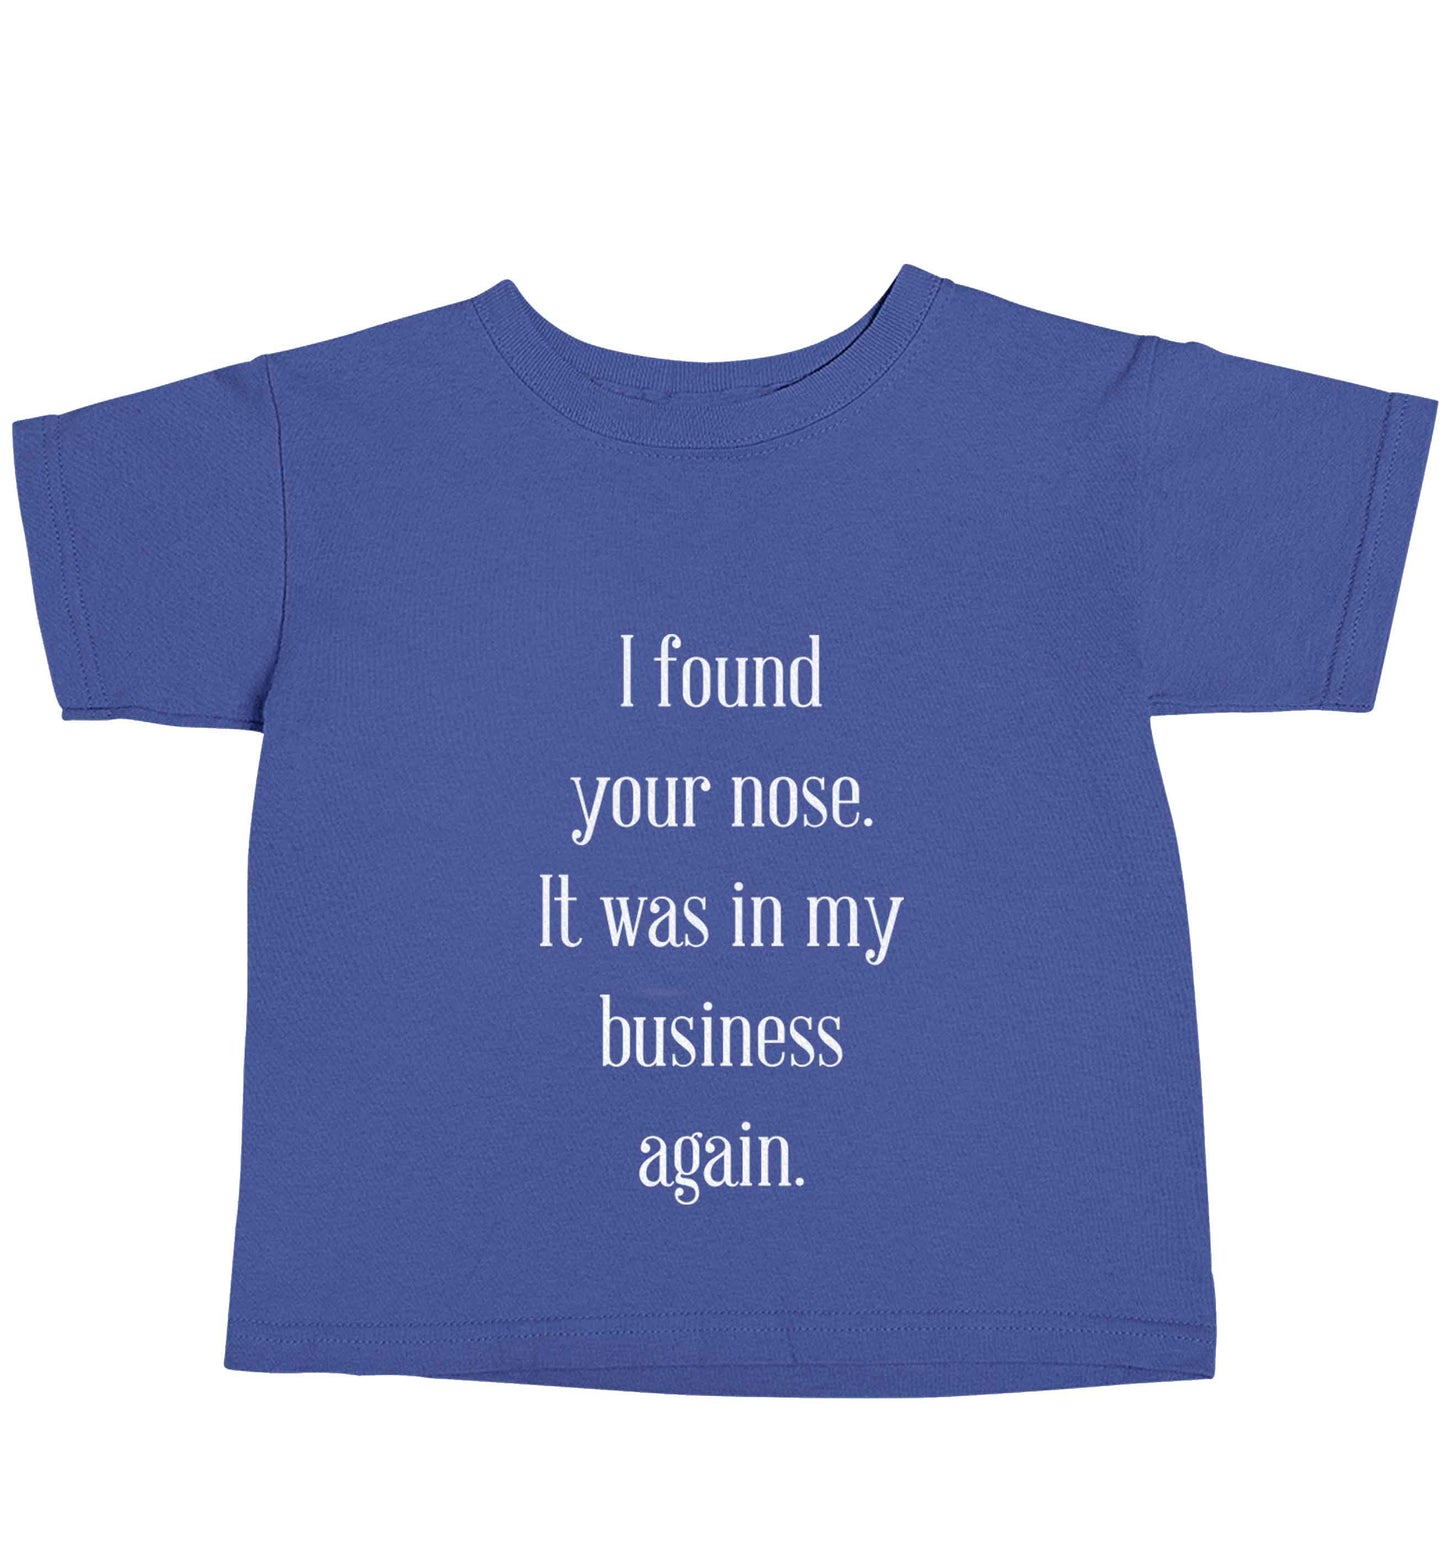 I found your nose it was in my business again blue baby toddler Tshirt 2 Years